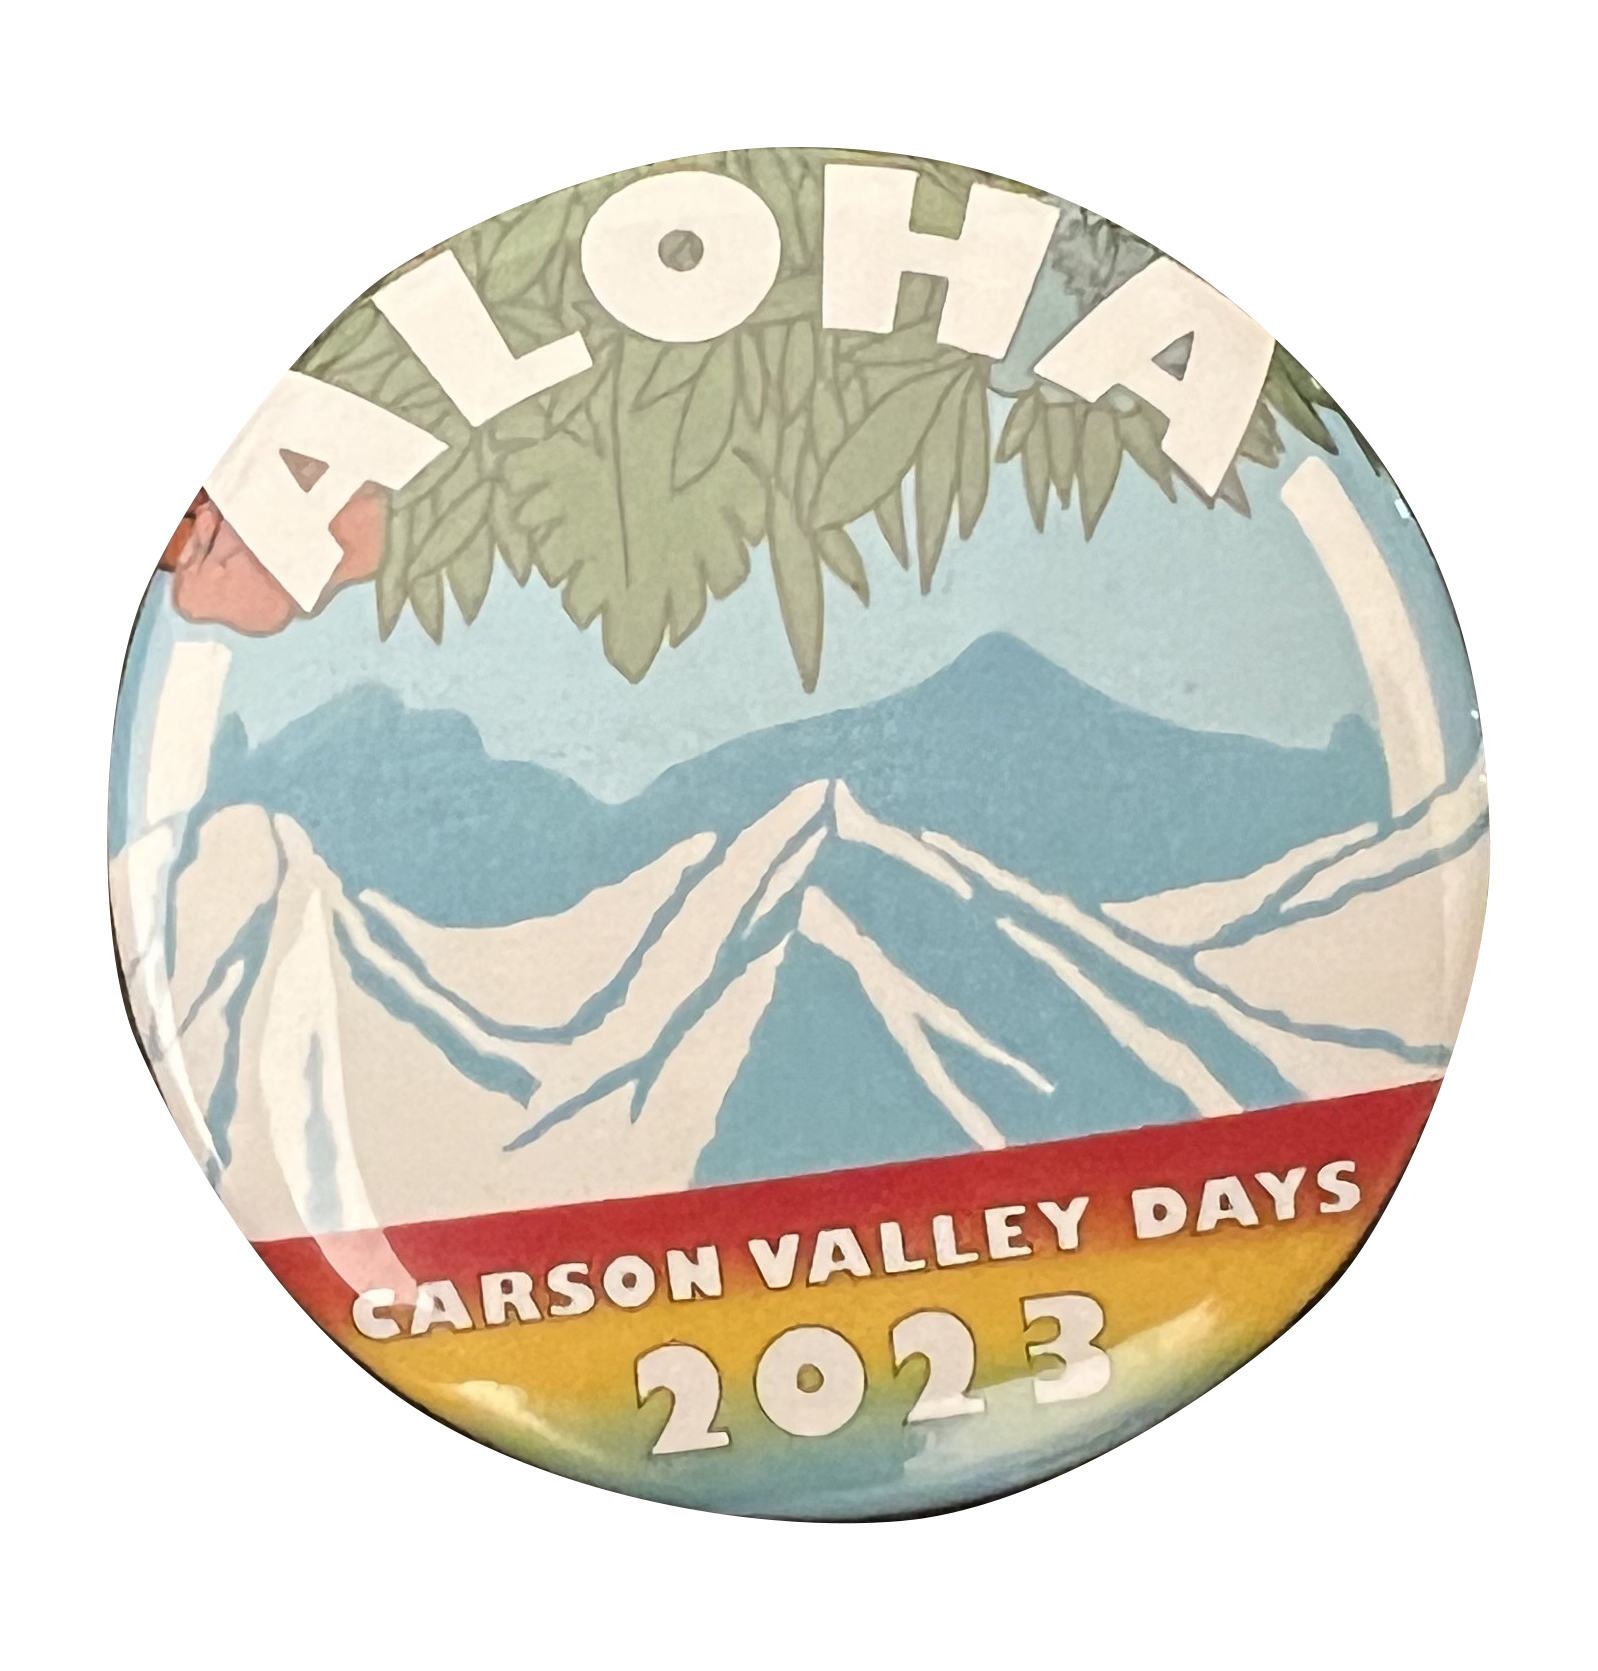 Presale tickets on sale for the 2023 Carson Valley Days Carnival